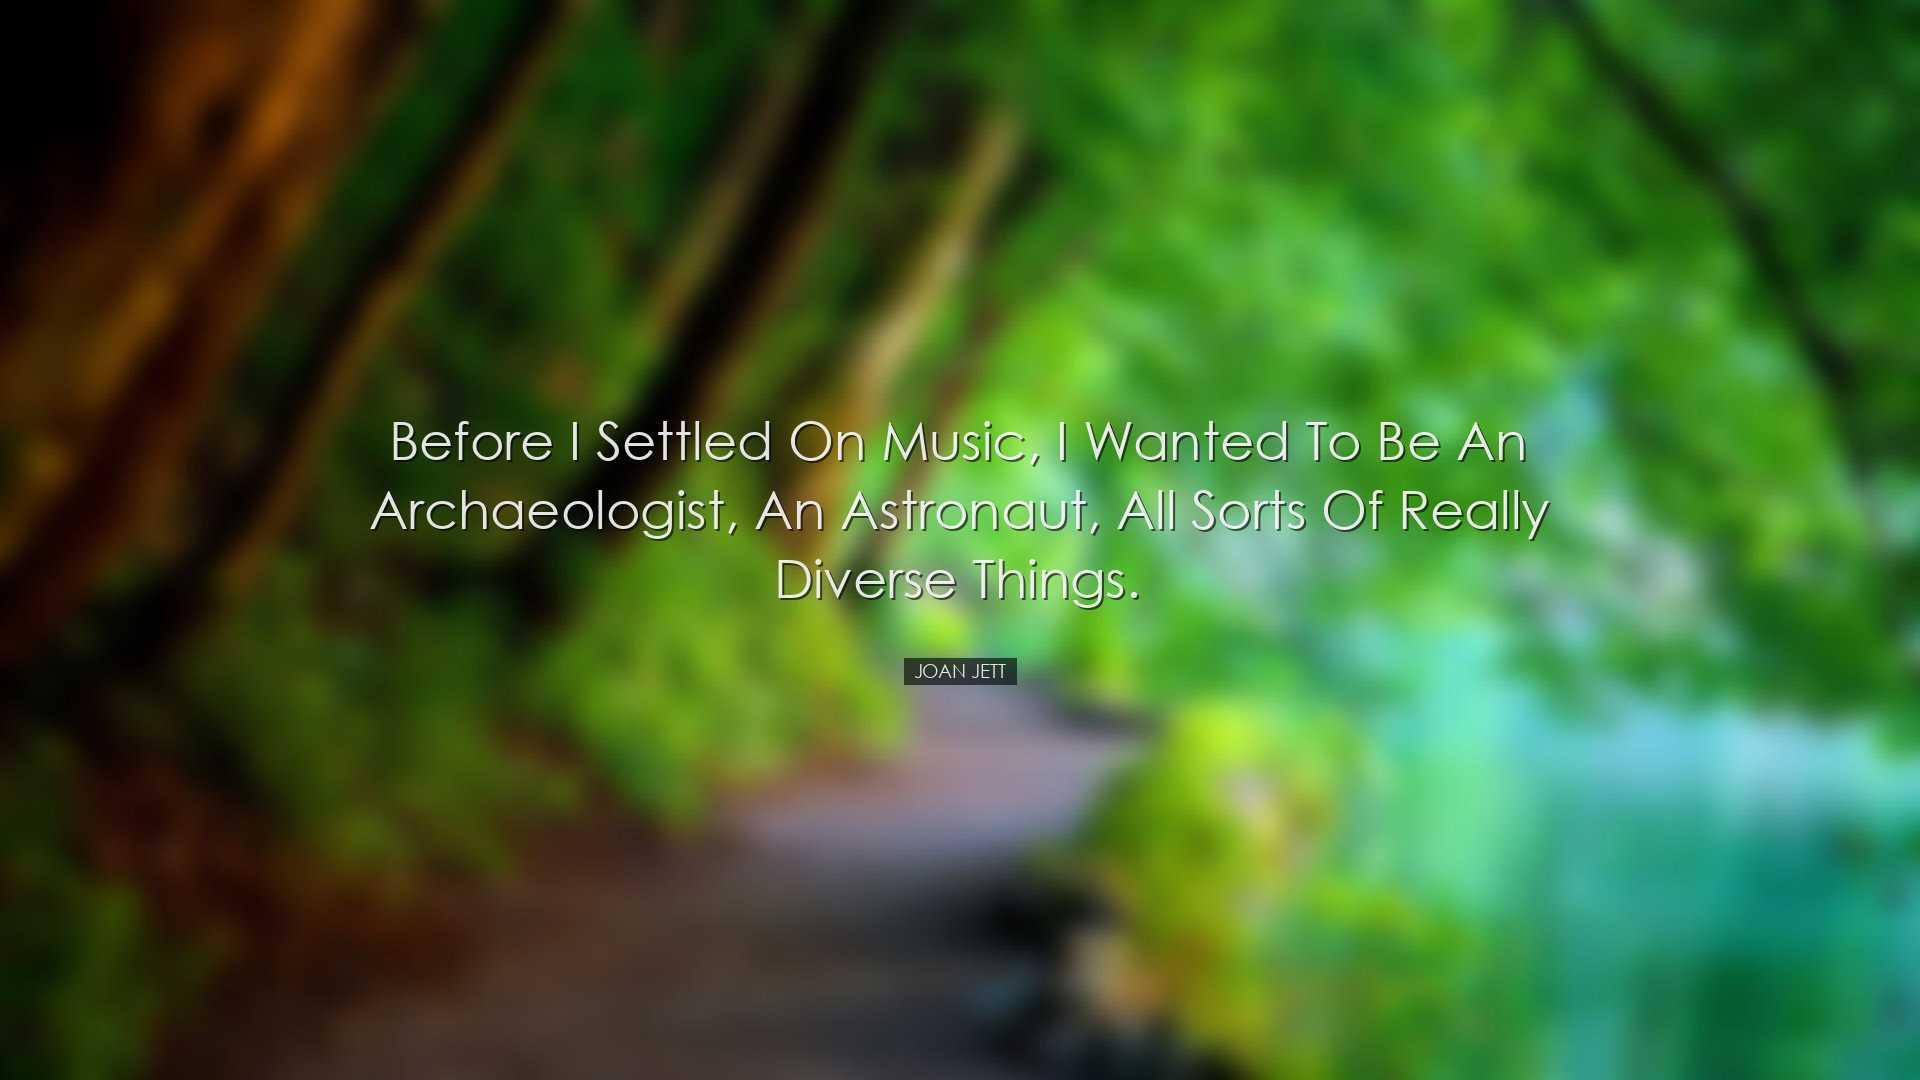 Before I settled on music, I wanted to be an archaeologist, an ast